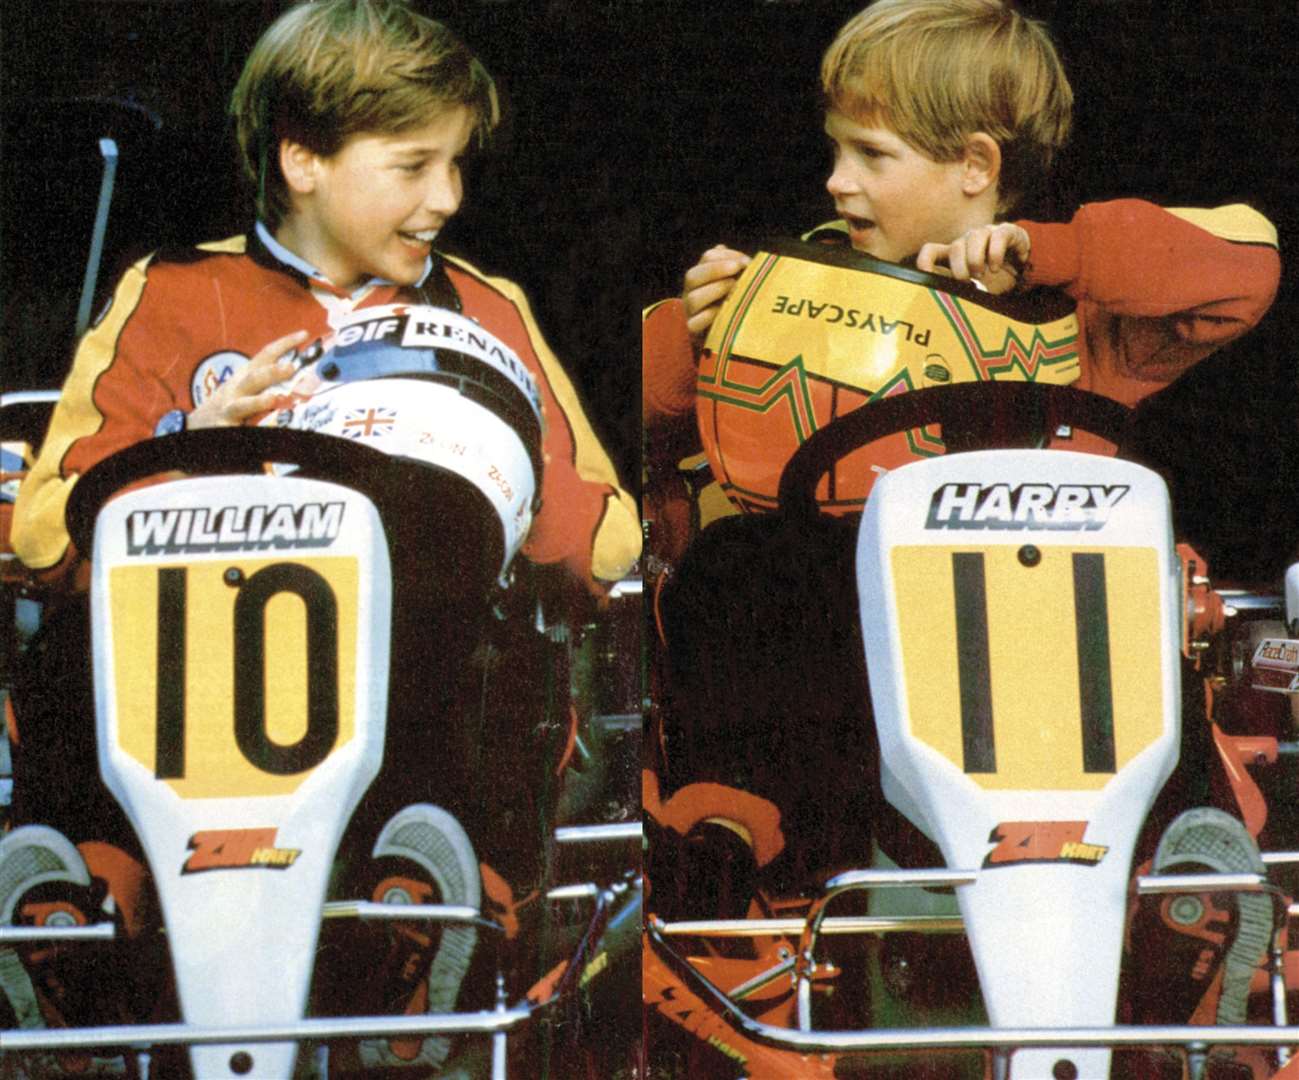 Princes William and Harry drove cadet karts with their names on the front in 1992